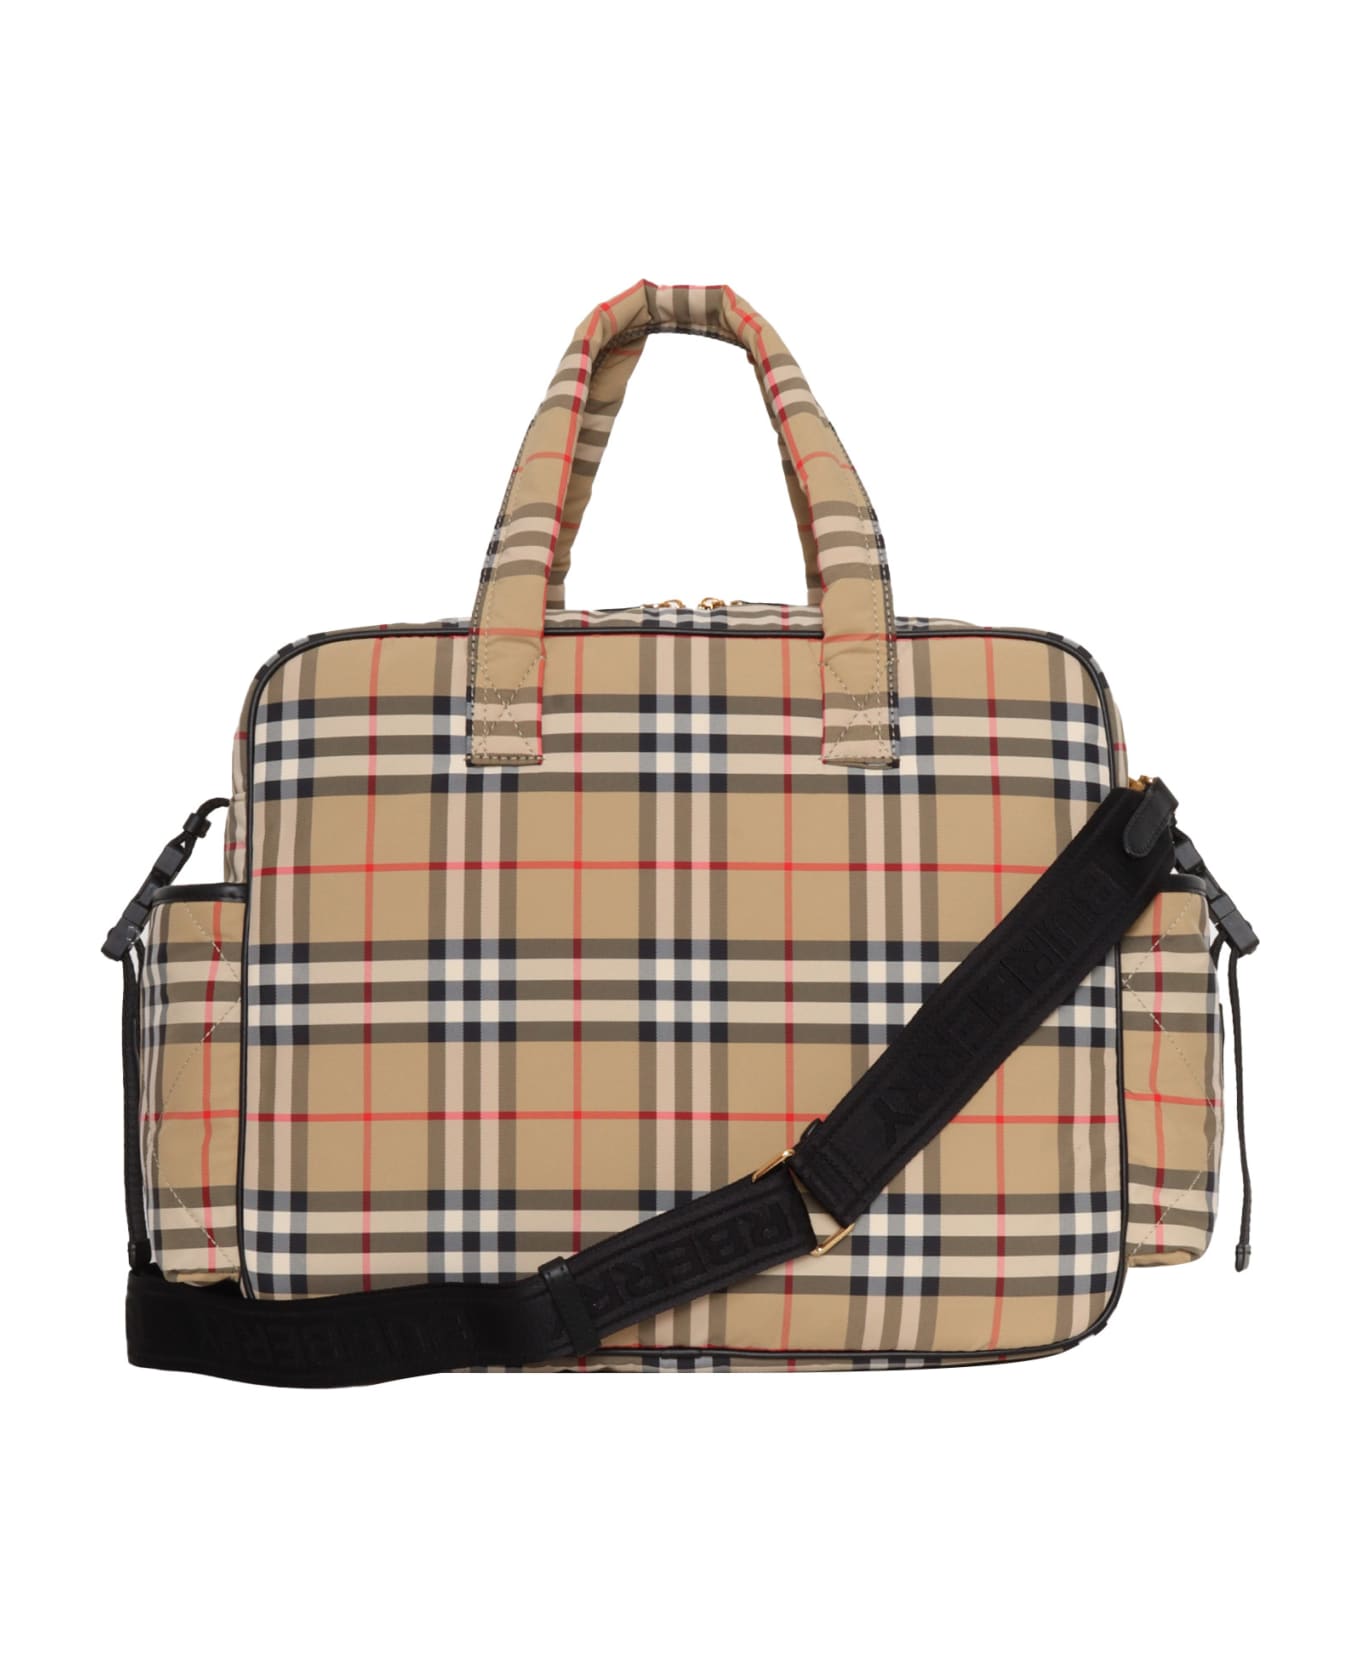 Burberry Check Pattern Bag - BEIGE アクセサリー＆ギフト